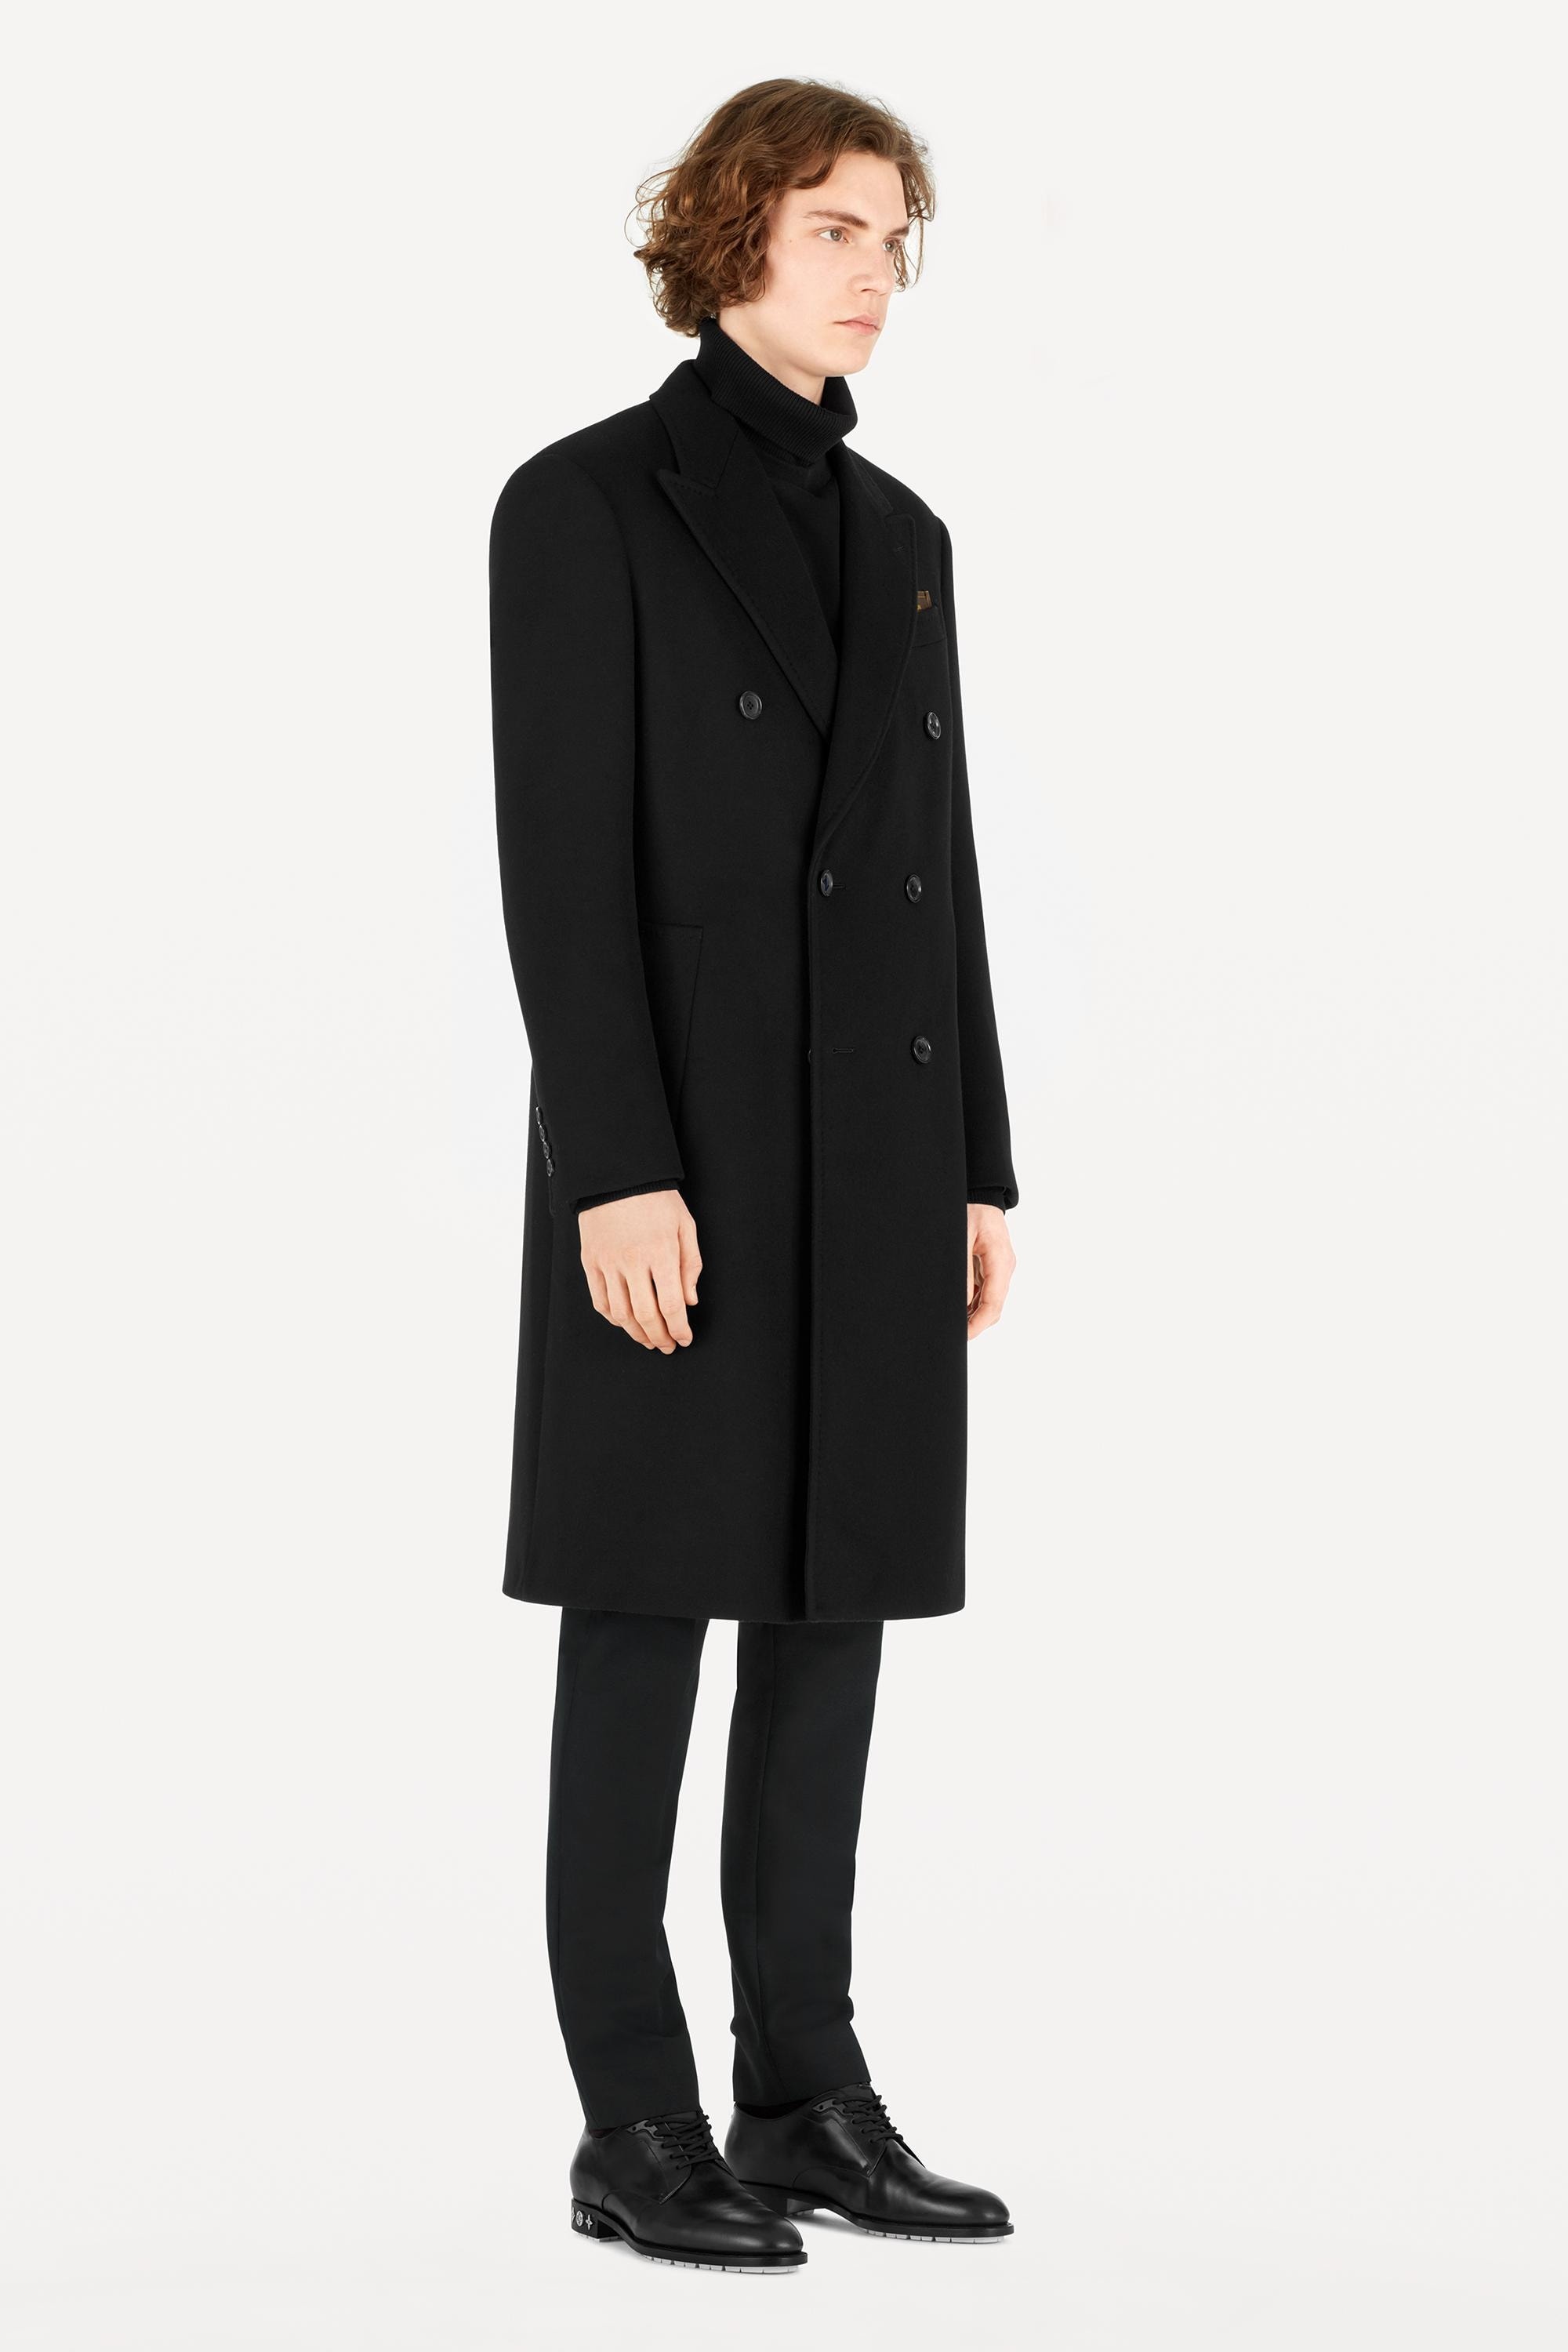 DOUBLE BREASTED TAILORED COAT - 3